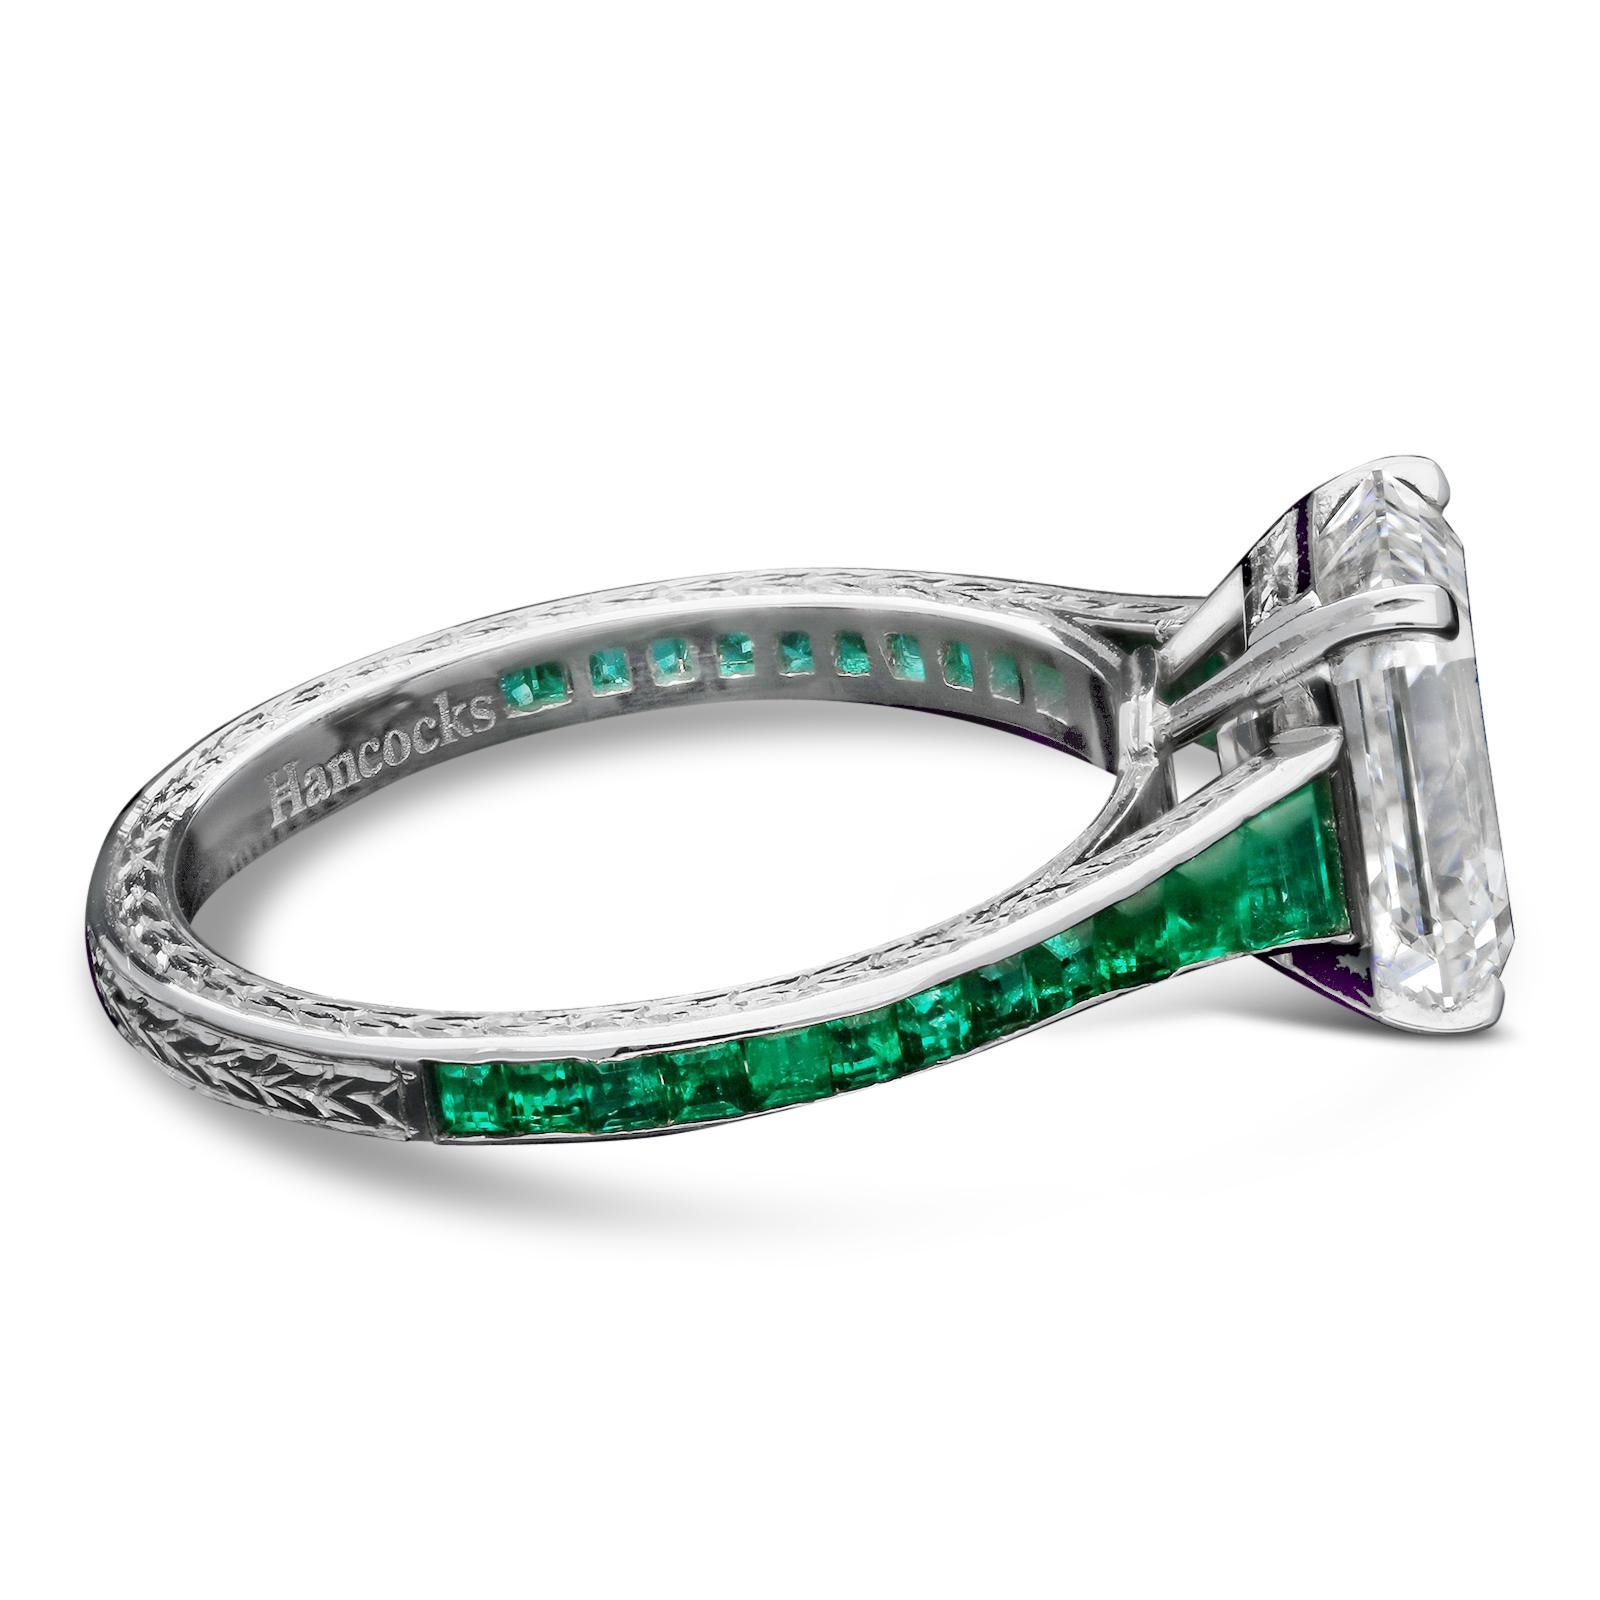 A beautiful diamond and emerald ring by Hancocks set to the centre with a lovely old Vintage emerald-cut diamond weighing 2.34ct and of F colour and VS2 clarity in a corner claw setting, the fine tapering band channel-set with calibre cut emeralds,